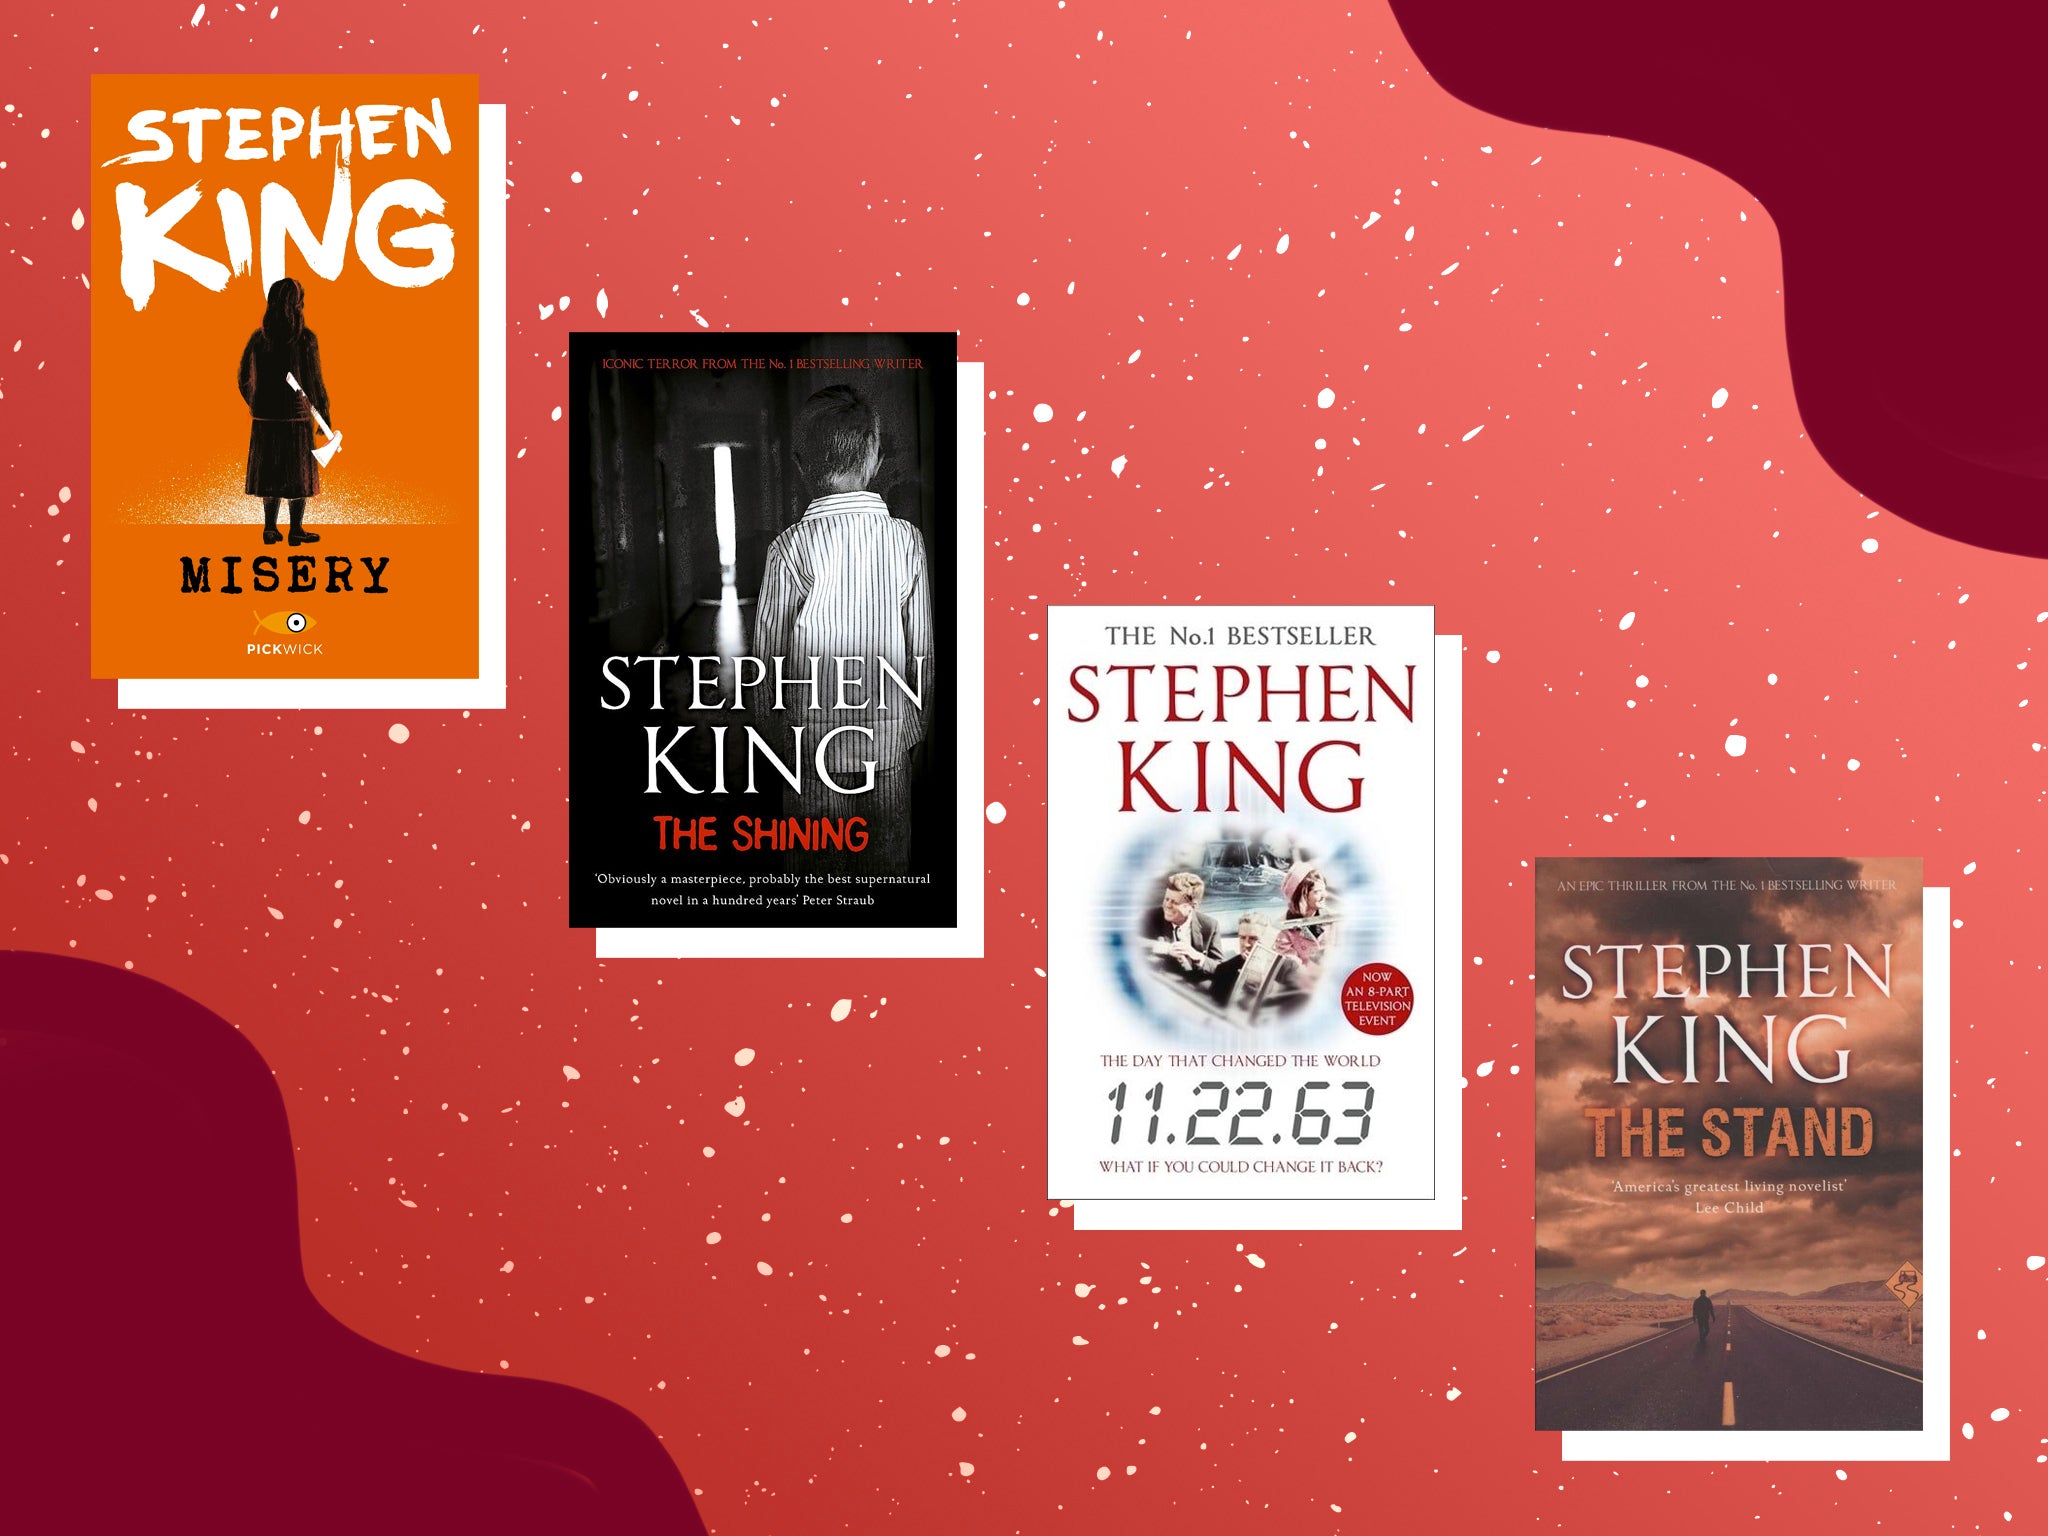 Best Stephen King books: 'IT' to 'The Shining